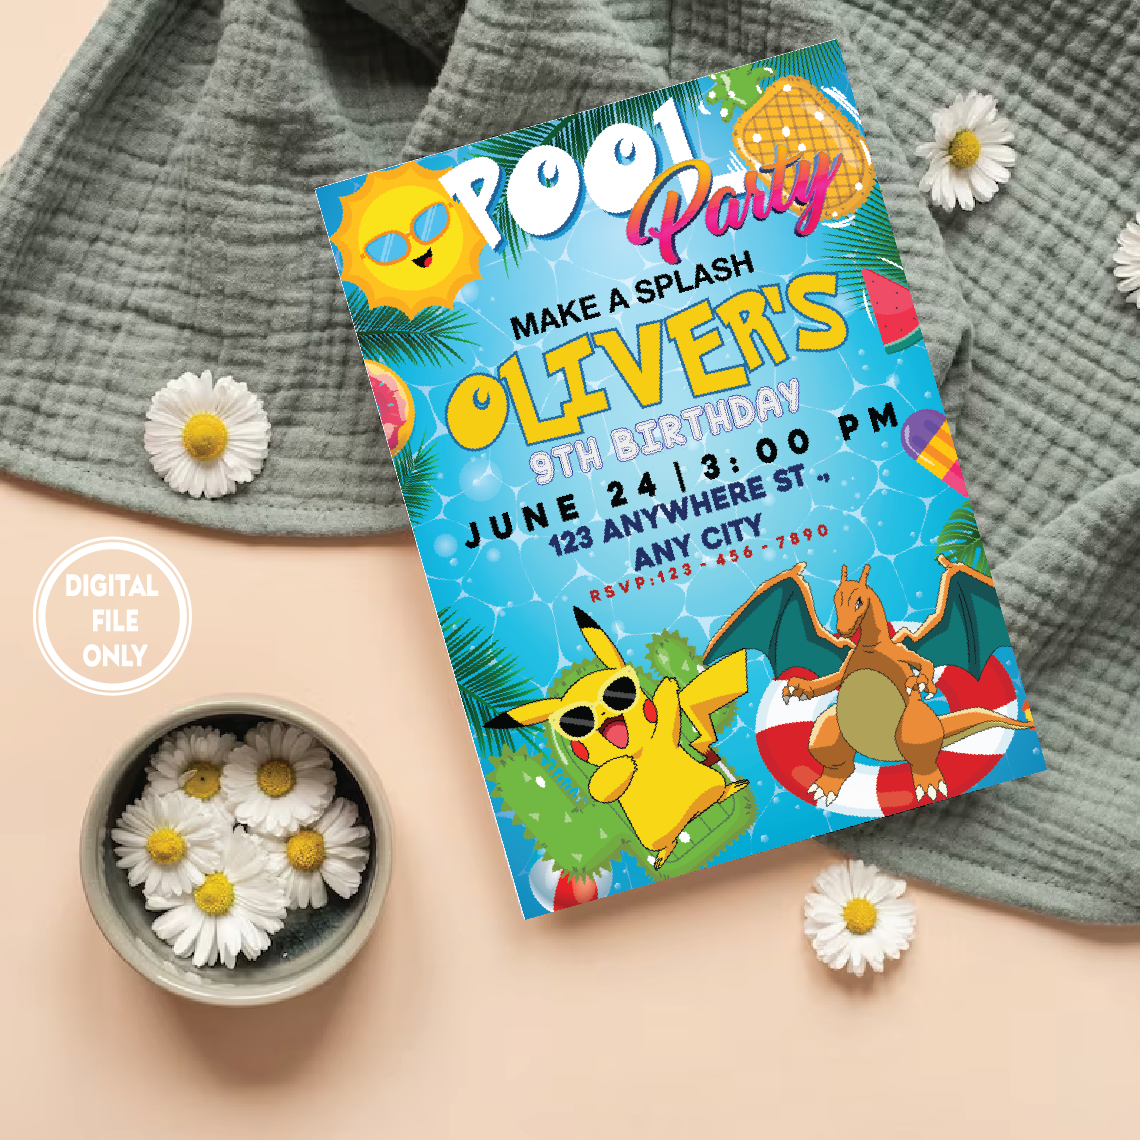 Personalized File Pokemone Birthday Invitation Digital, Pikachu Party Invite, Summer Pool Party Invitation, For Gamer Pool Birthday Boy Party PNG File Only